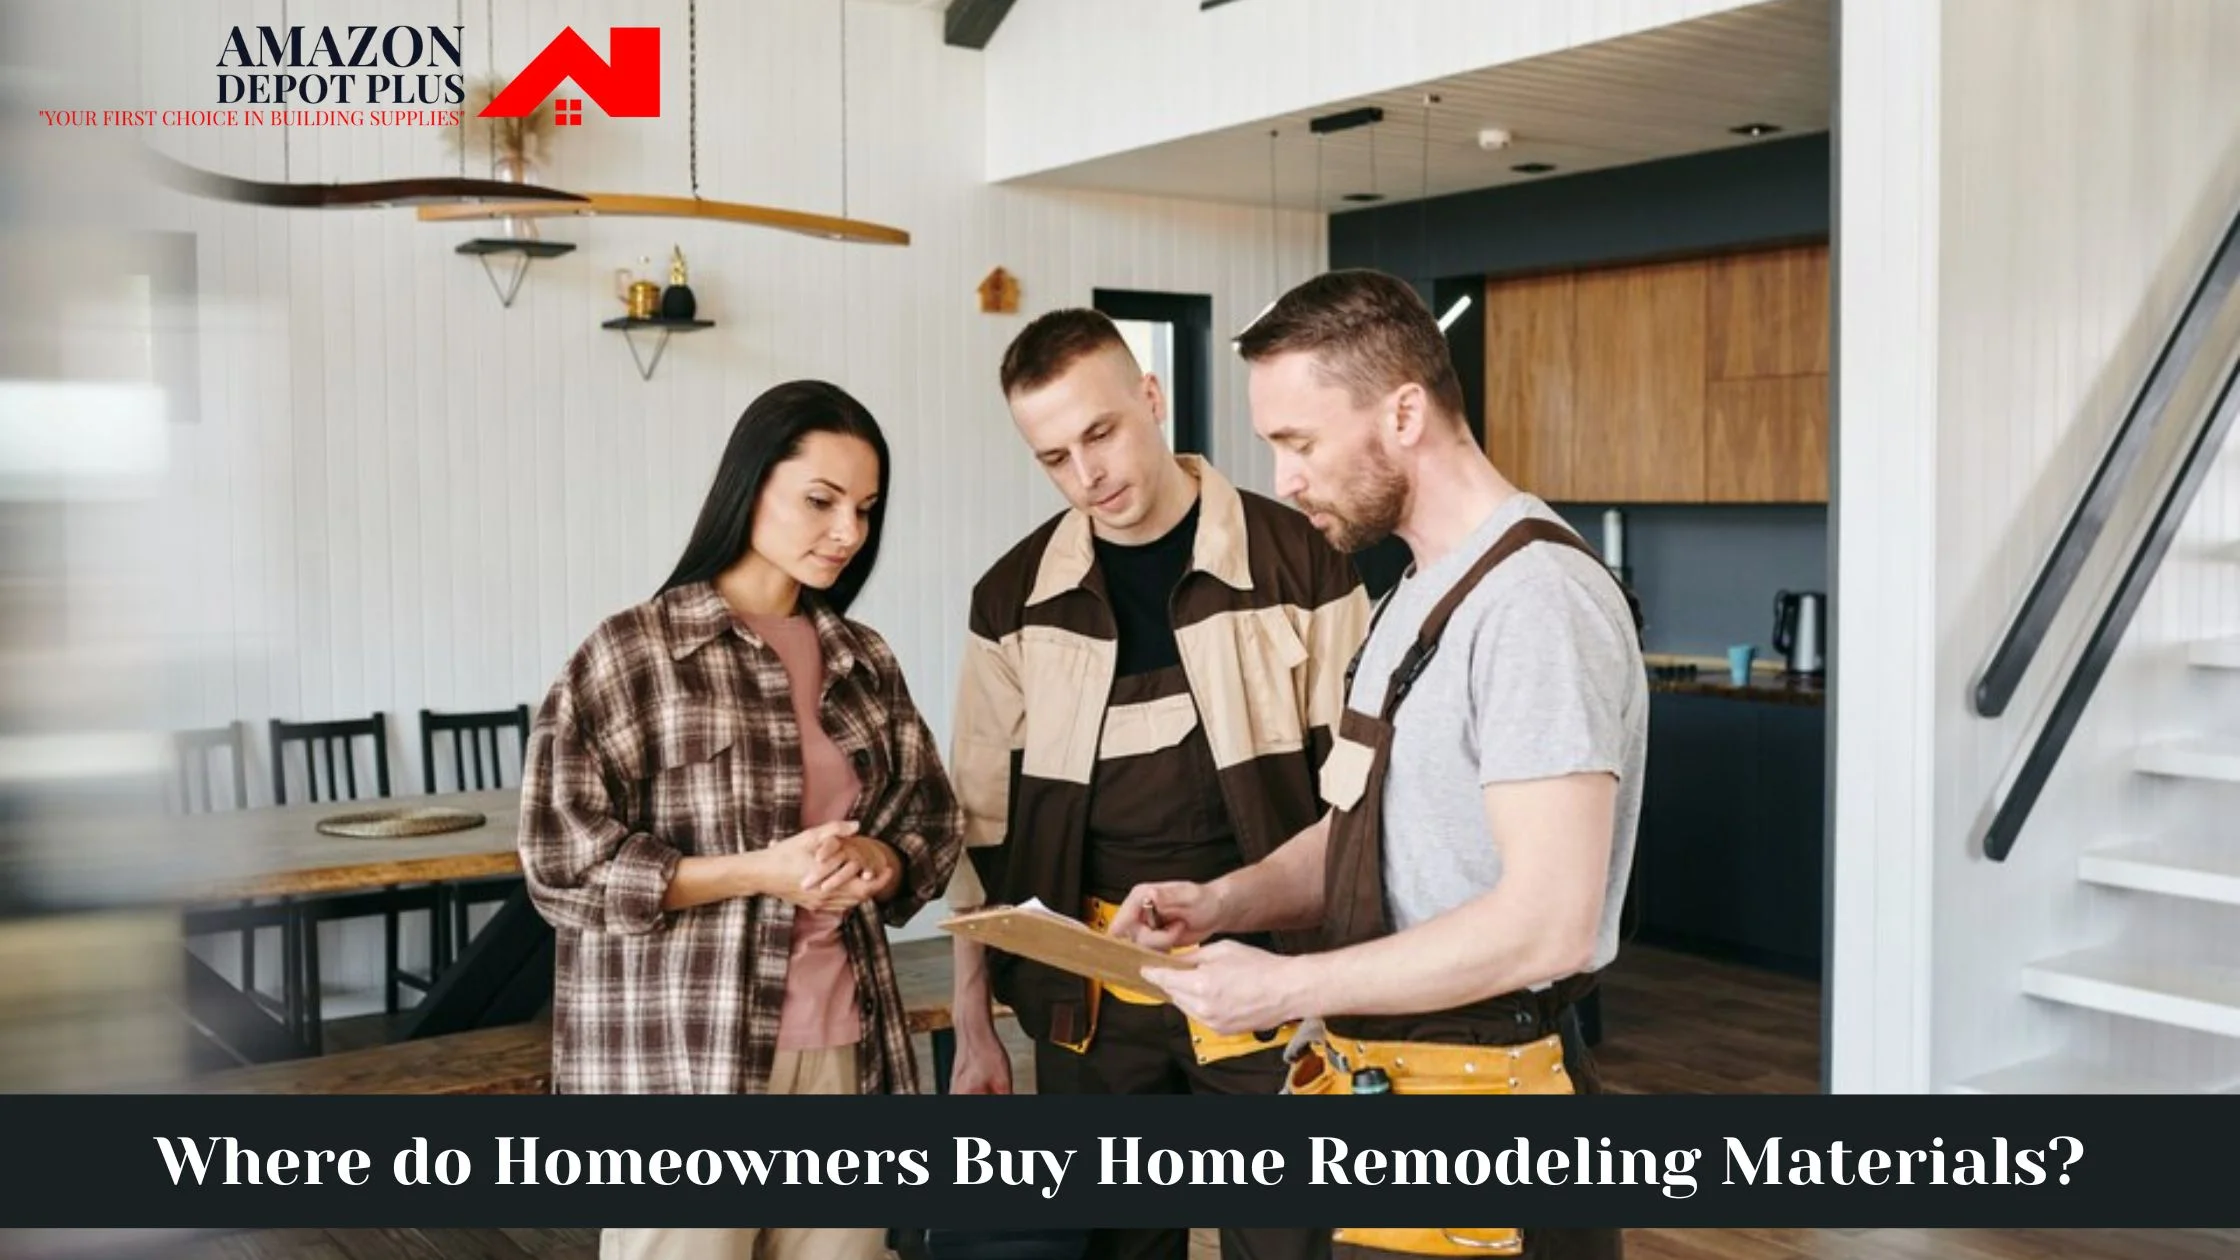 Where do Homeowners Buy Home Remodeling Materials?